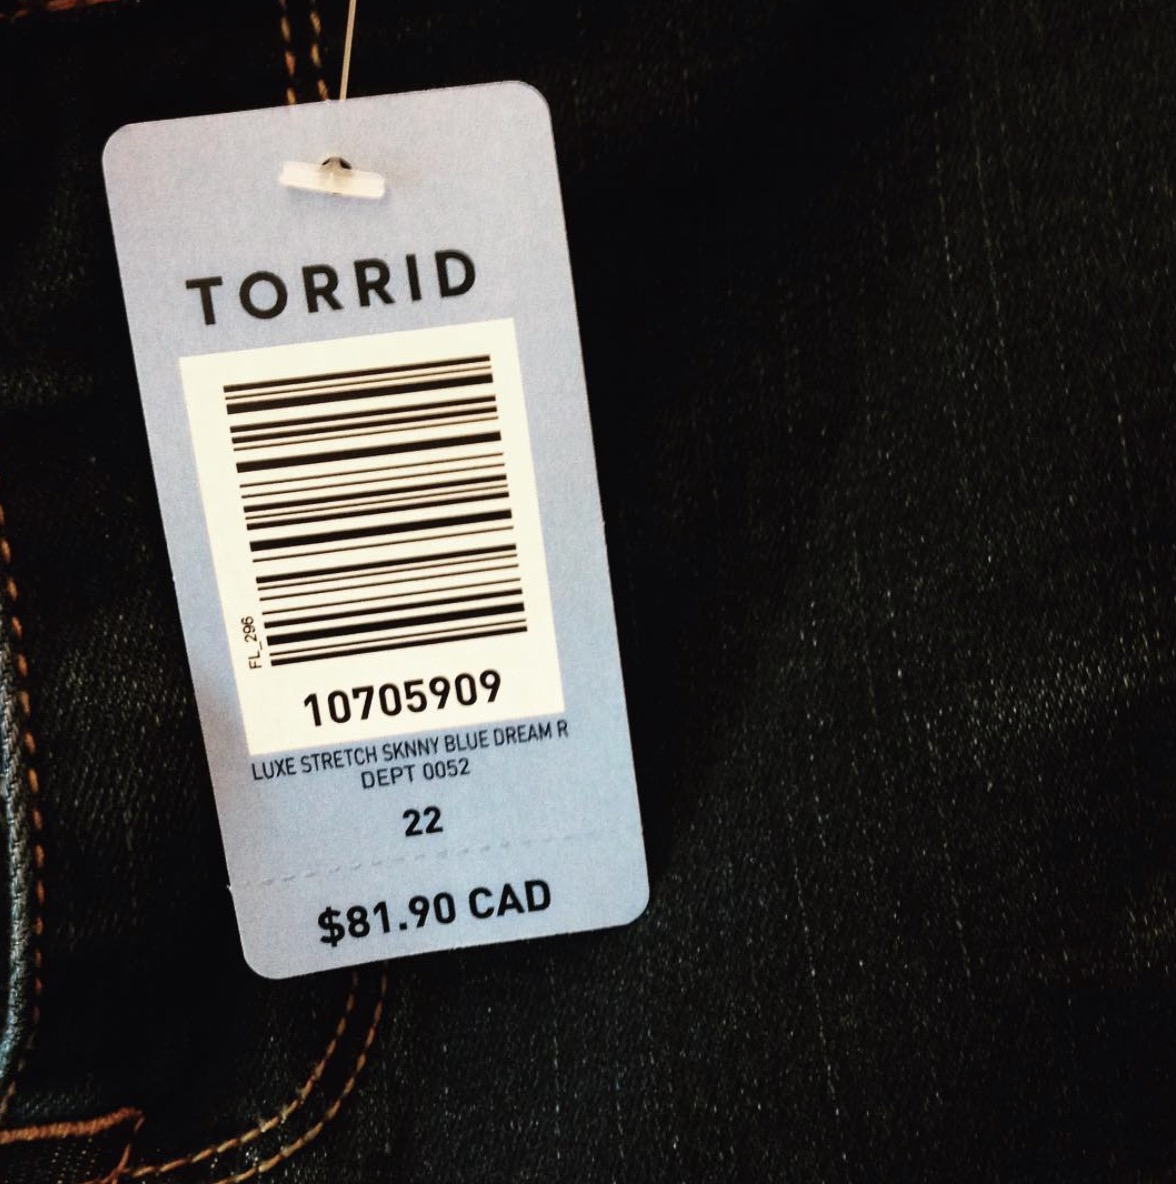 I Shopped At Addition Elle And Torrid, Which Plus-Size Store Is Better?